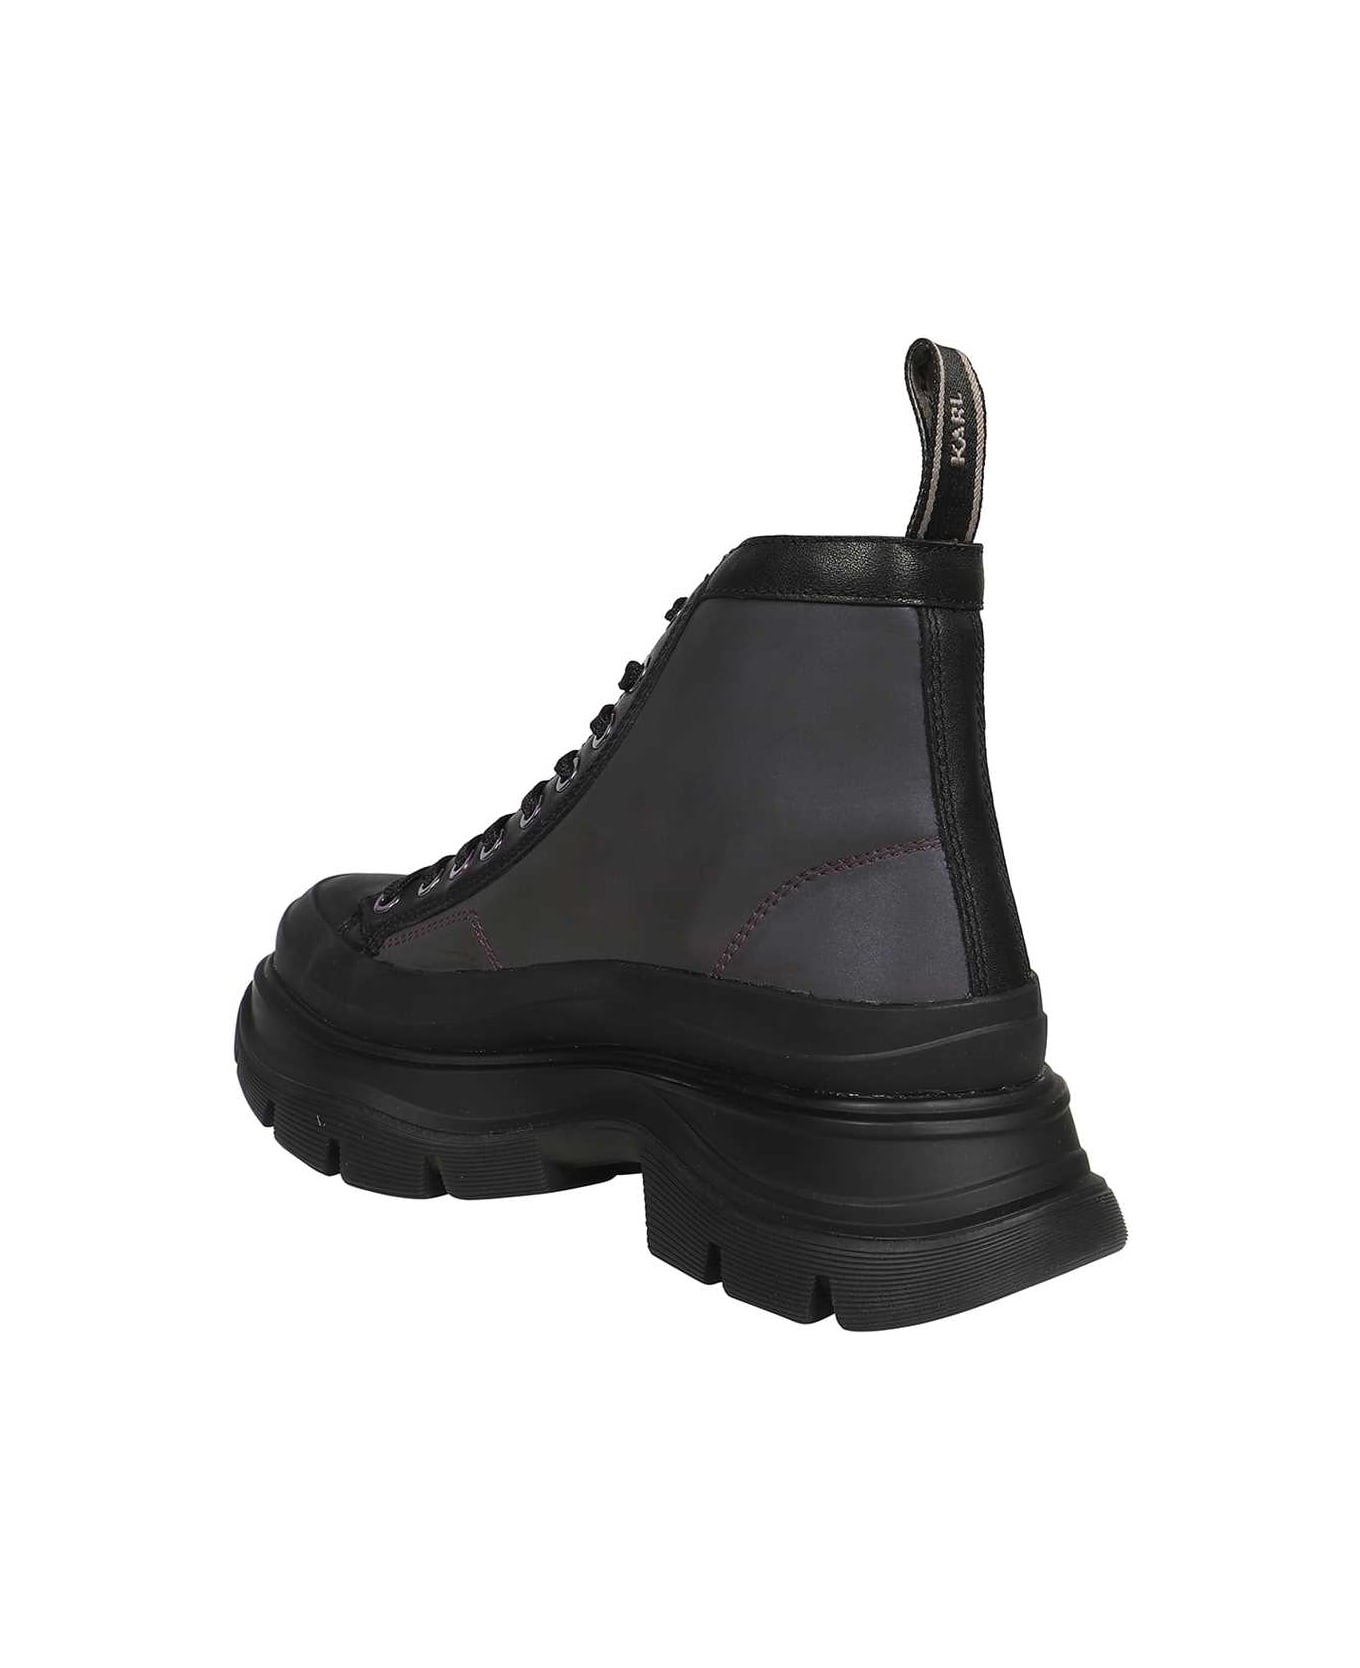 Karl Lagerfeld Lace-up Ankle Boots - black ブーツ